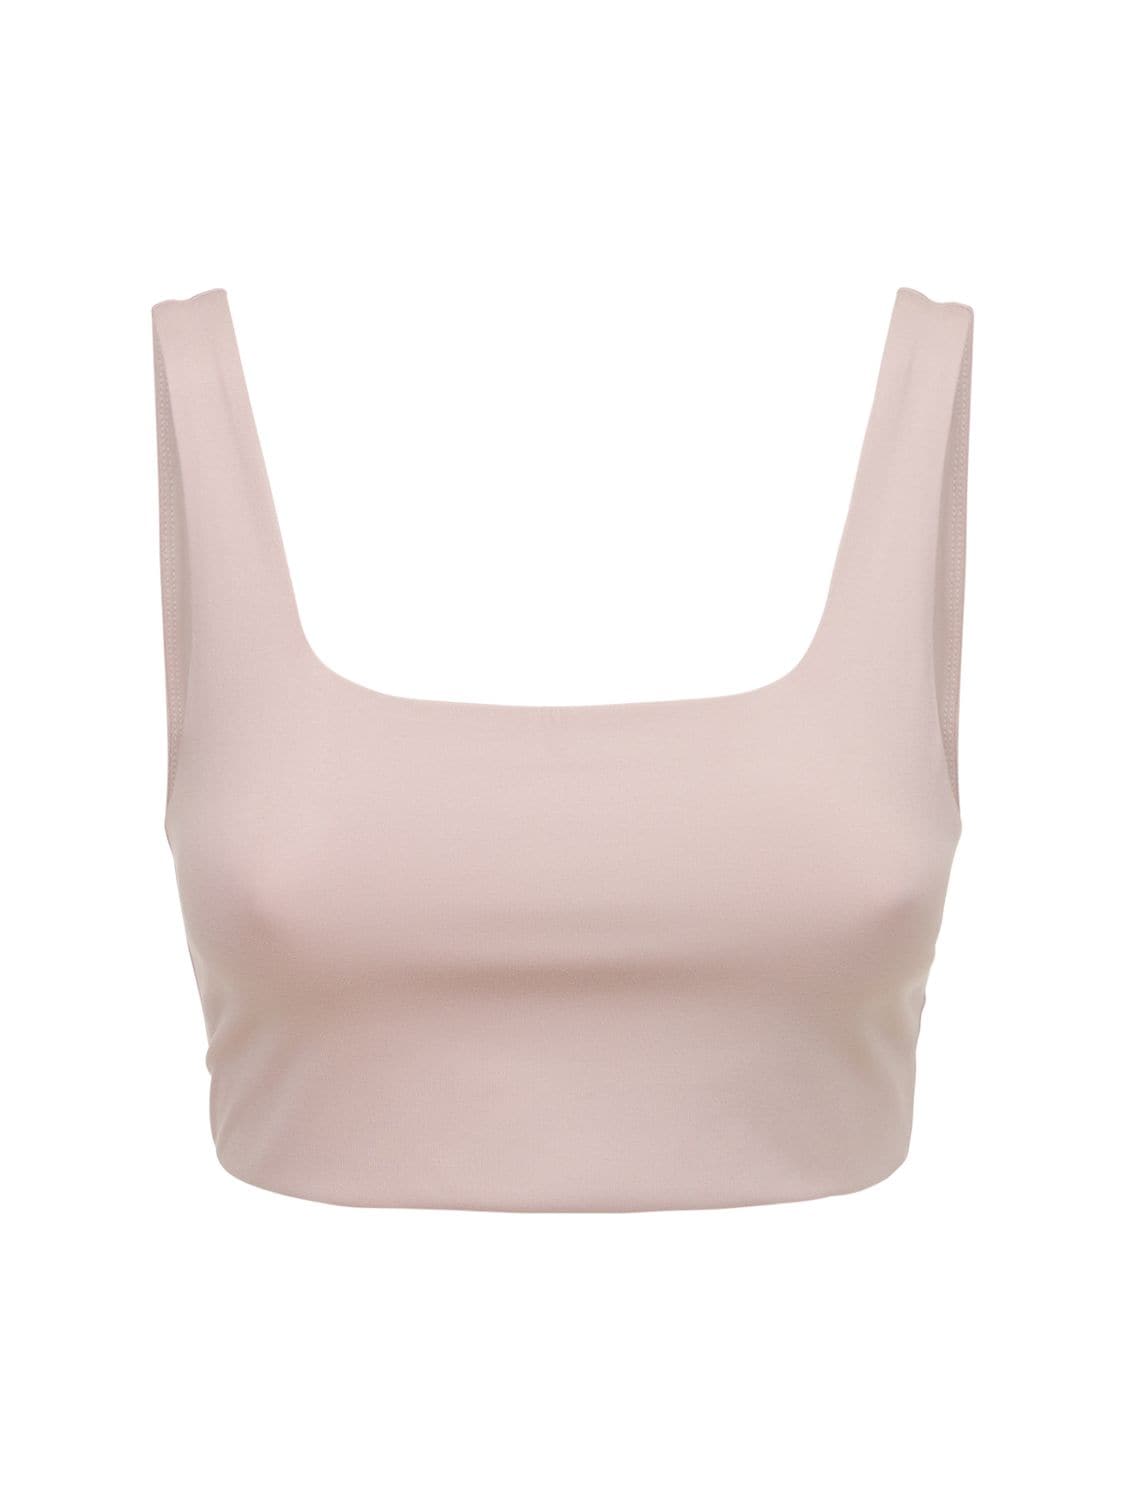 Girlfriend Collective Tommy Bra Top